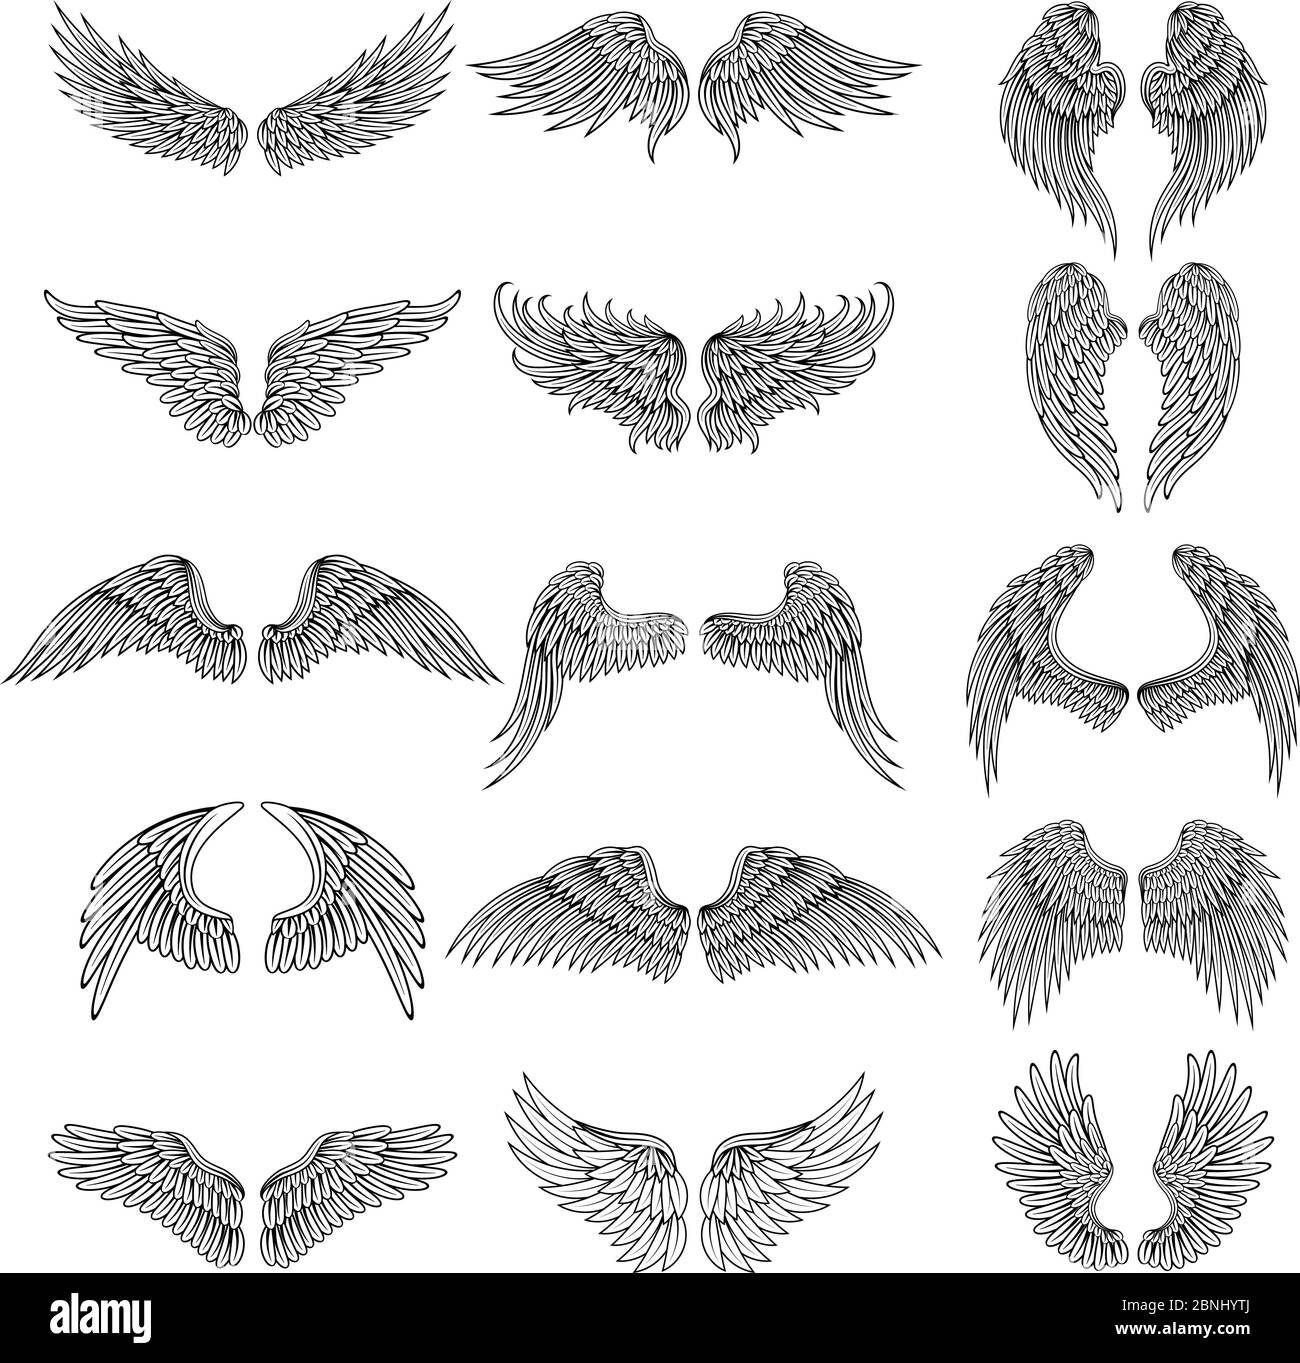 Tattoo design pictures of different stylized wings. Vector illustrations for logos design Stock Vector